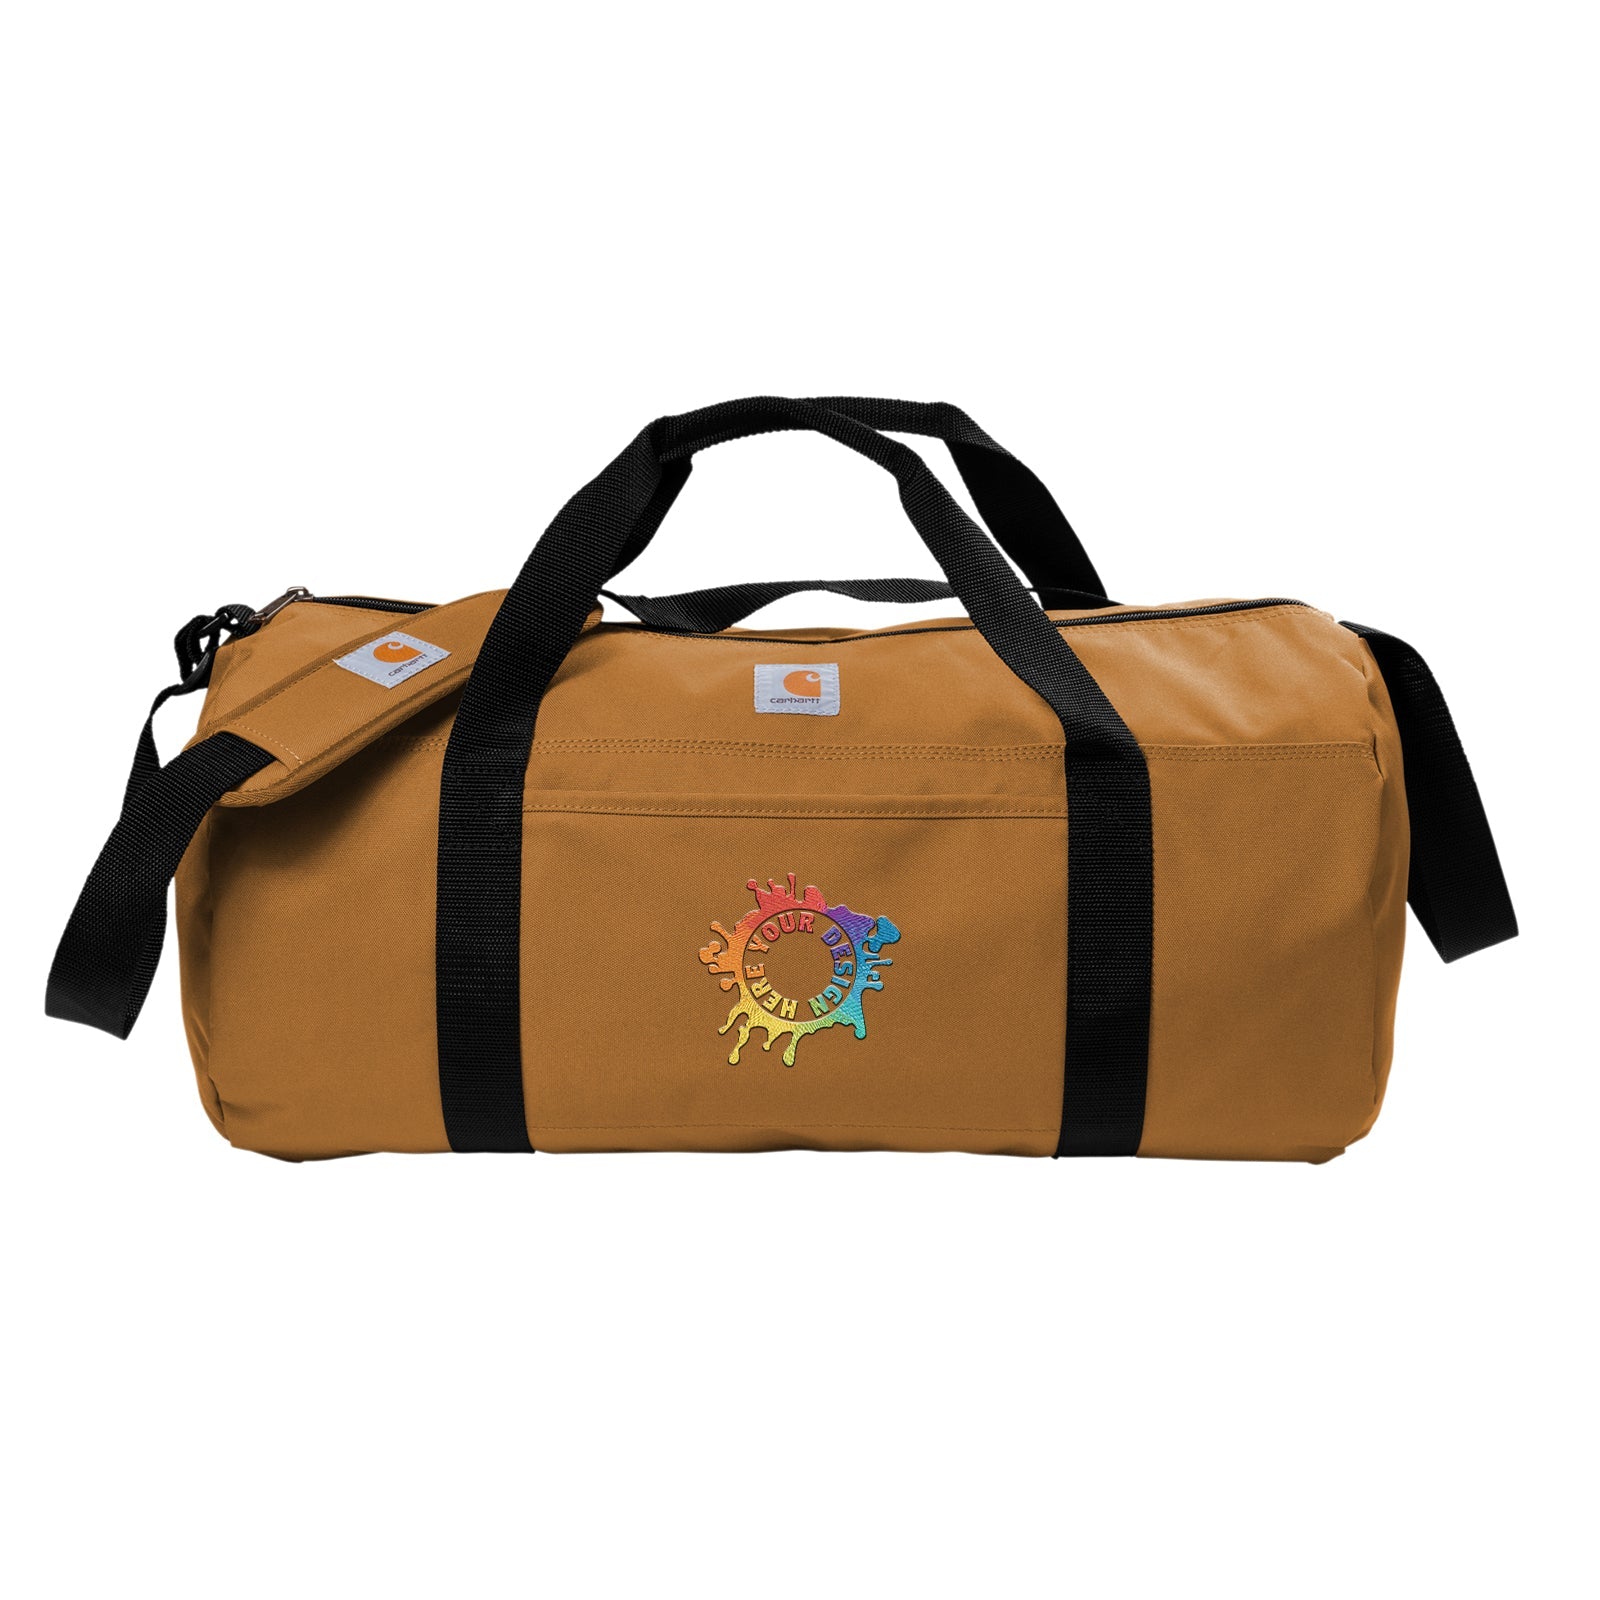 Carhartt Canvas Packable Duffel with Pouch - Mato & Hash